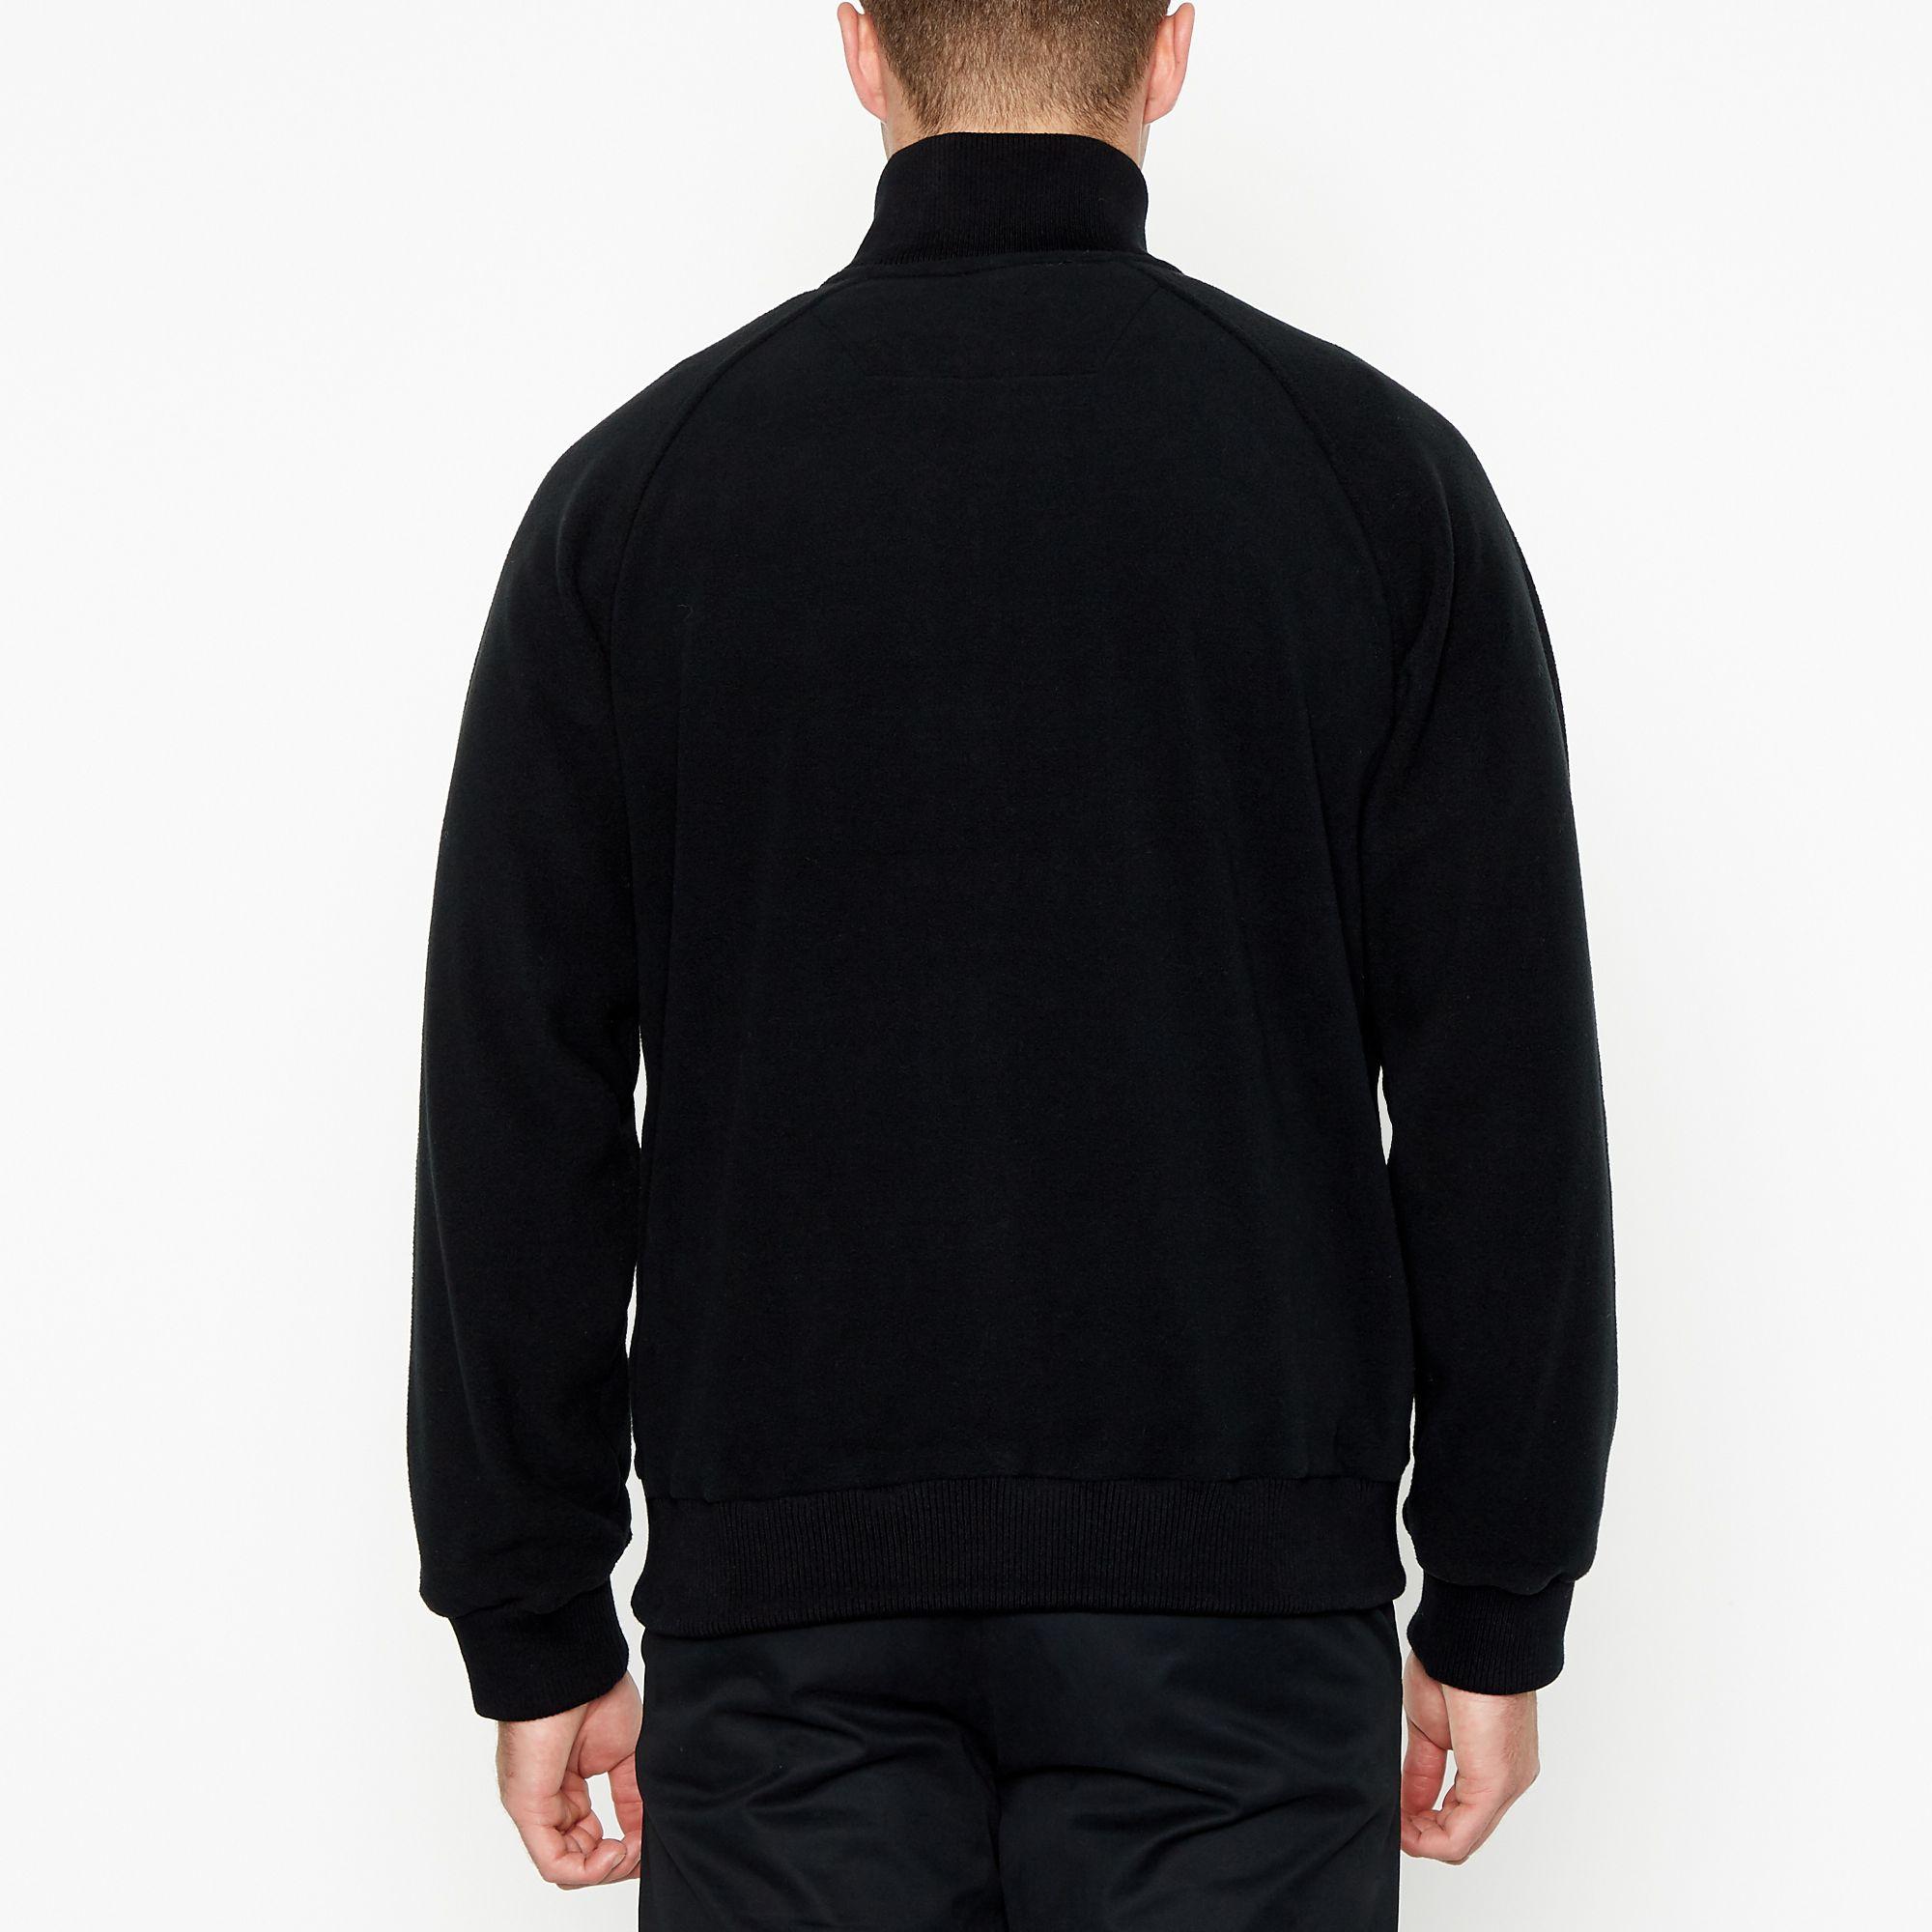 Fred Perry Fleece Track Jacket in Black for Men - Lyst